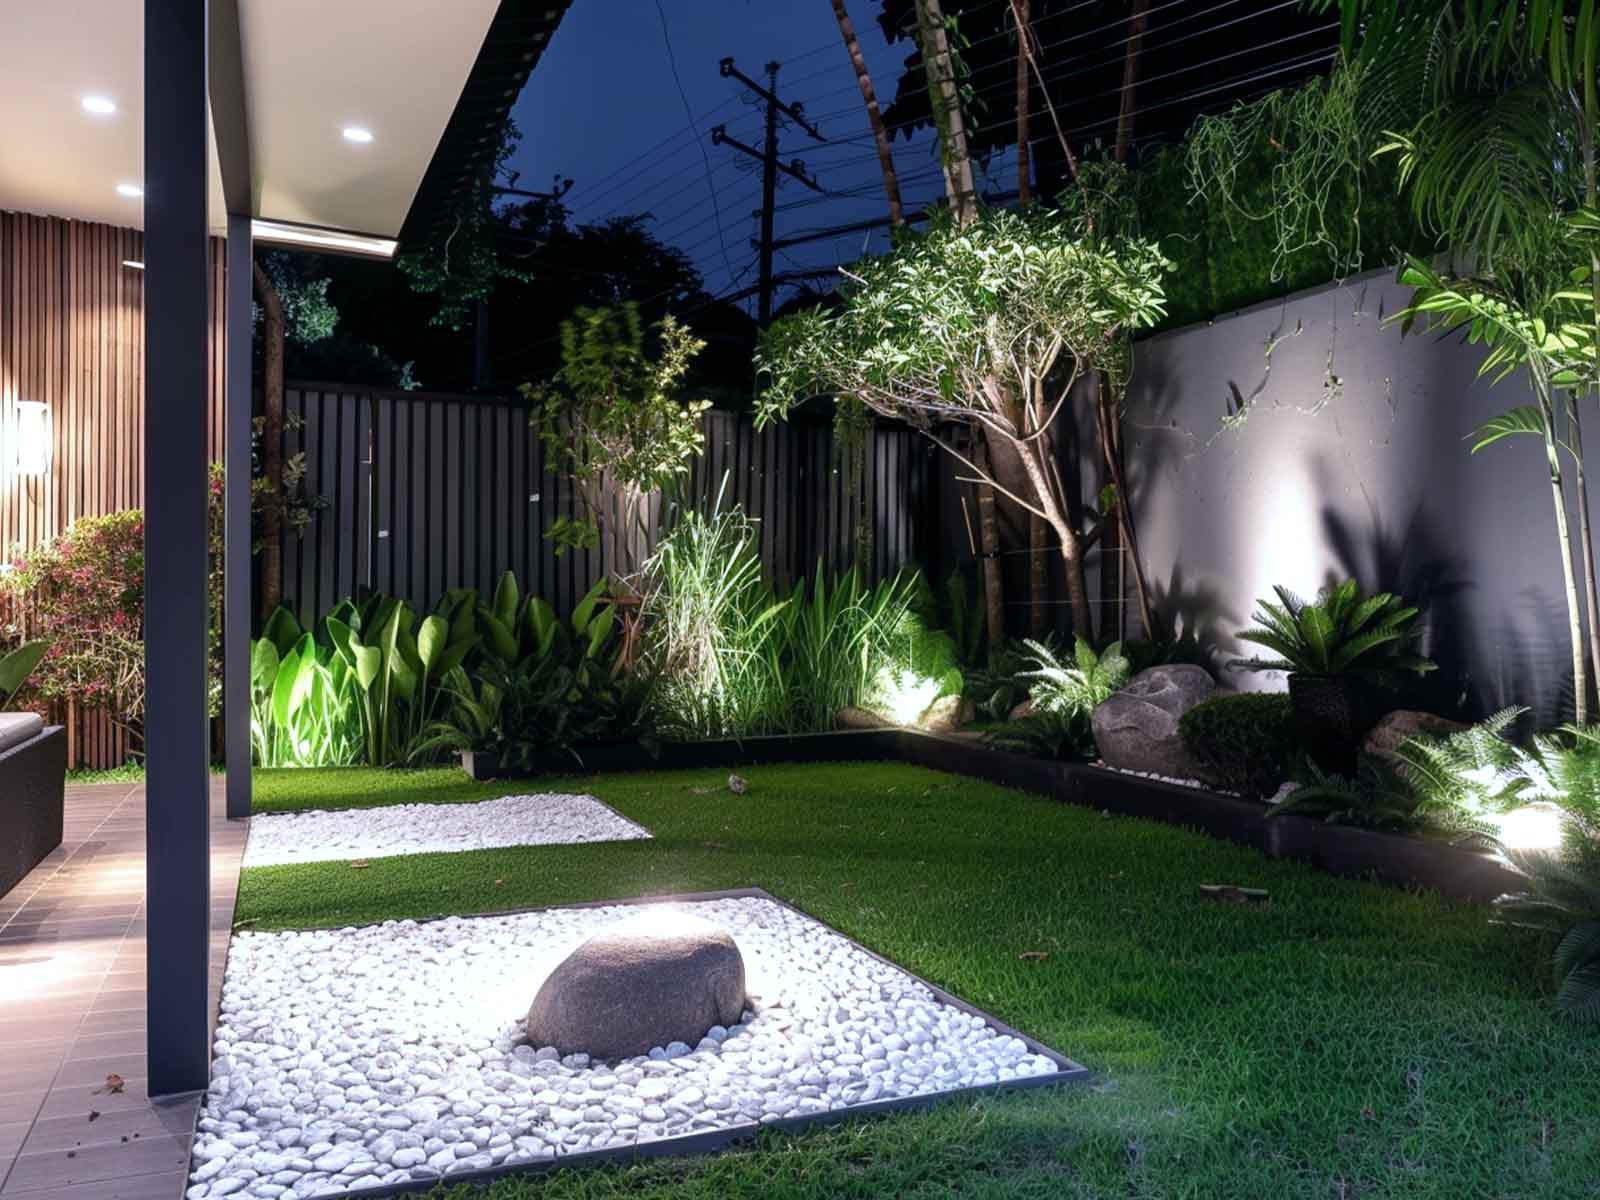 Scattered cool white spotlight illuminating different elements of a garden